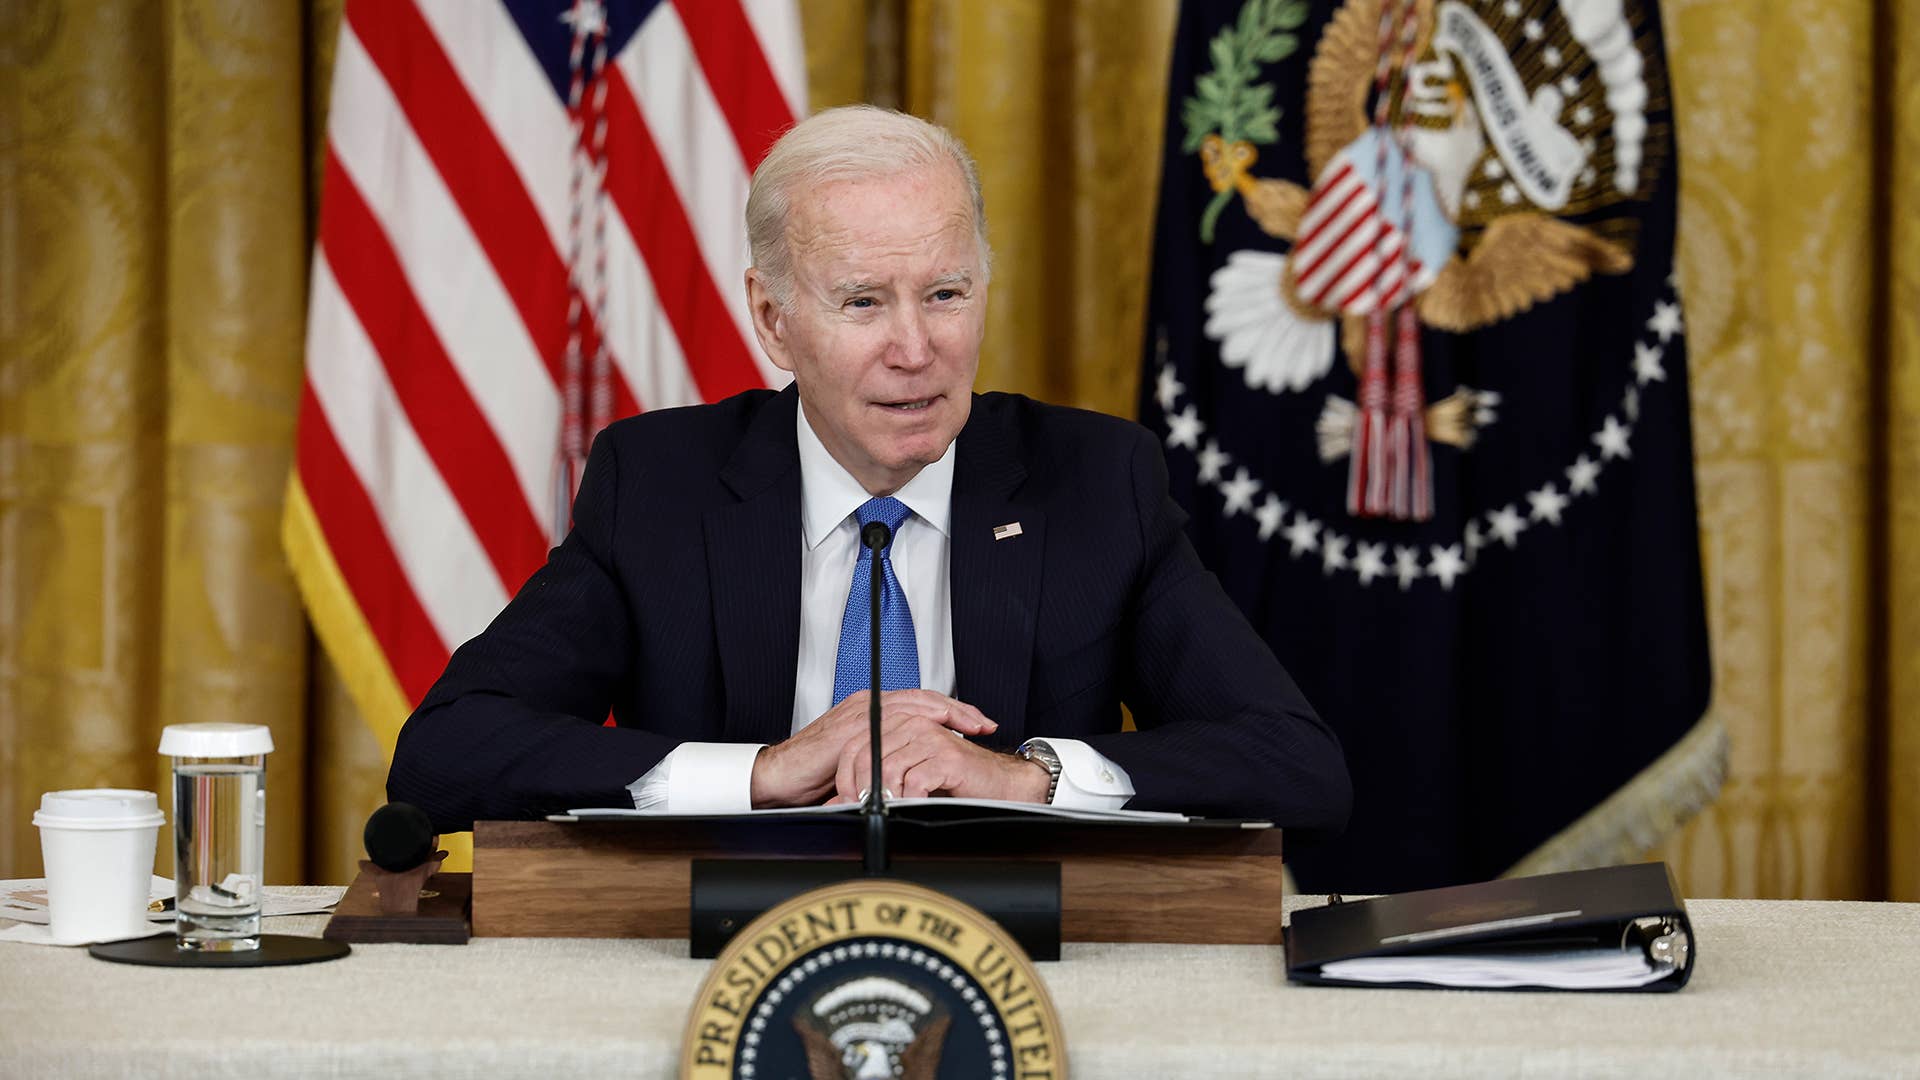 President Joe Biden gives remarks before the start of a meeting with governors